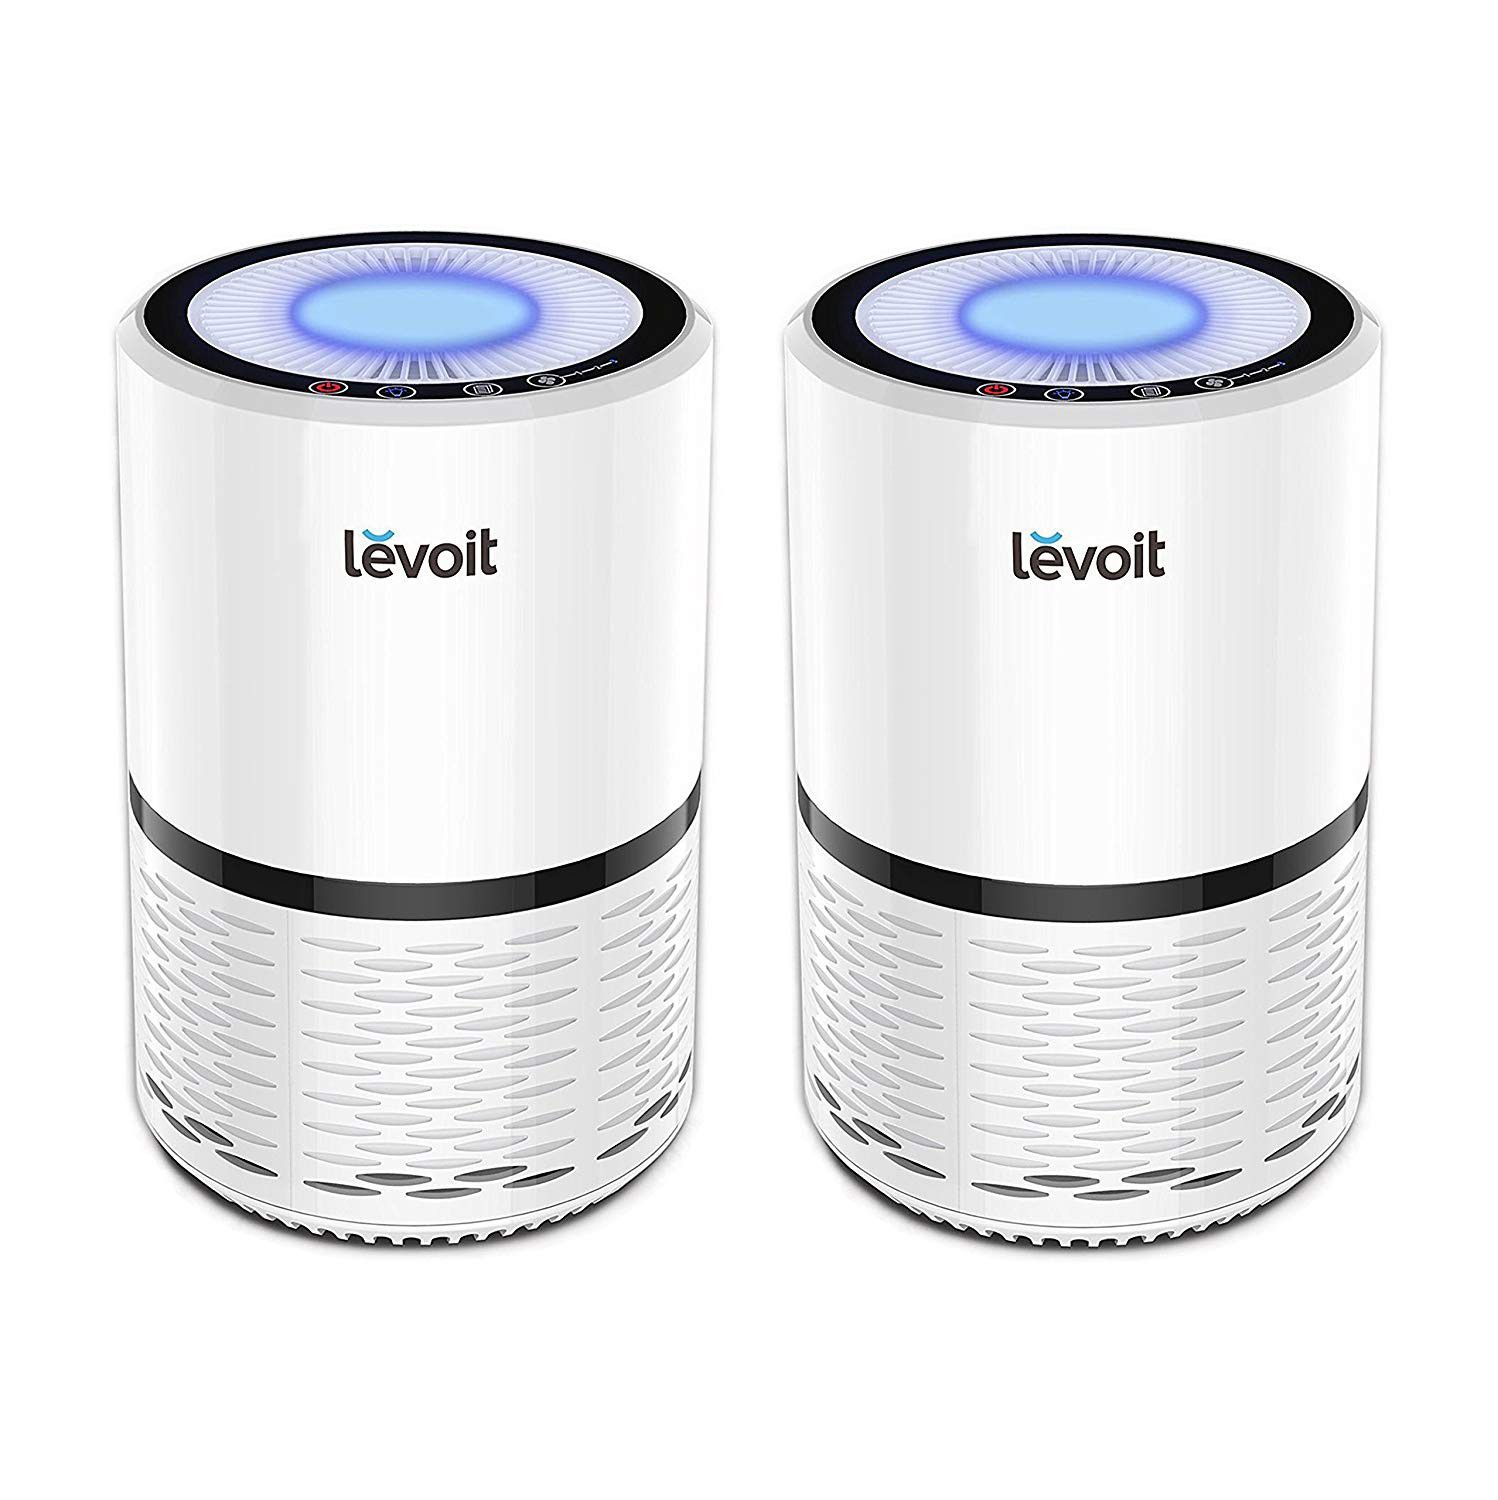 LEVOIT LV-H132 Air Purifier 2-pack. For Home with True HEPA Filter